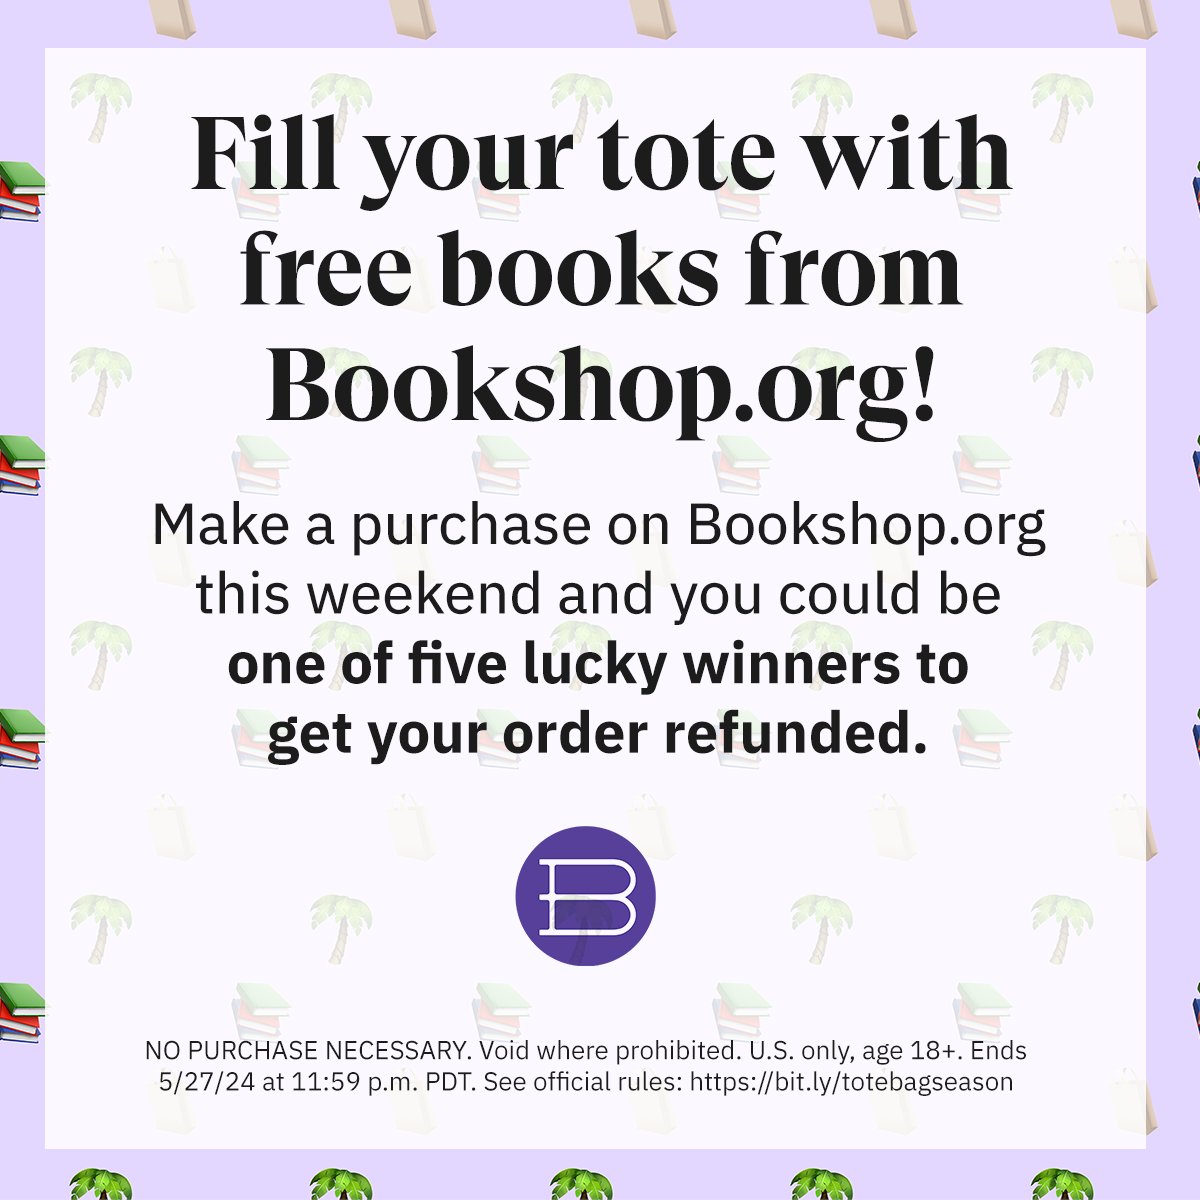 HAPPY MEMORIAL DAY WEEKEND @everyone 
Memorial Day Promo bookshop.org/shop/lovetibet 
this weekend – WIN Bookshop.org '5 lucky winners get free books'. And help Tibet House US - NYC (Publications) earn 15% affiliated commissions.